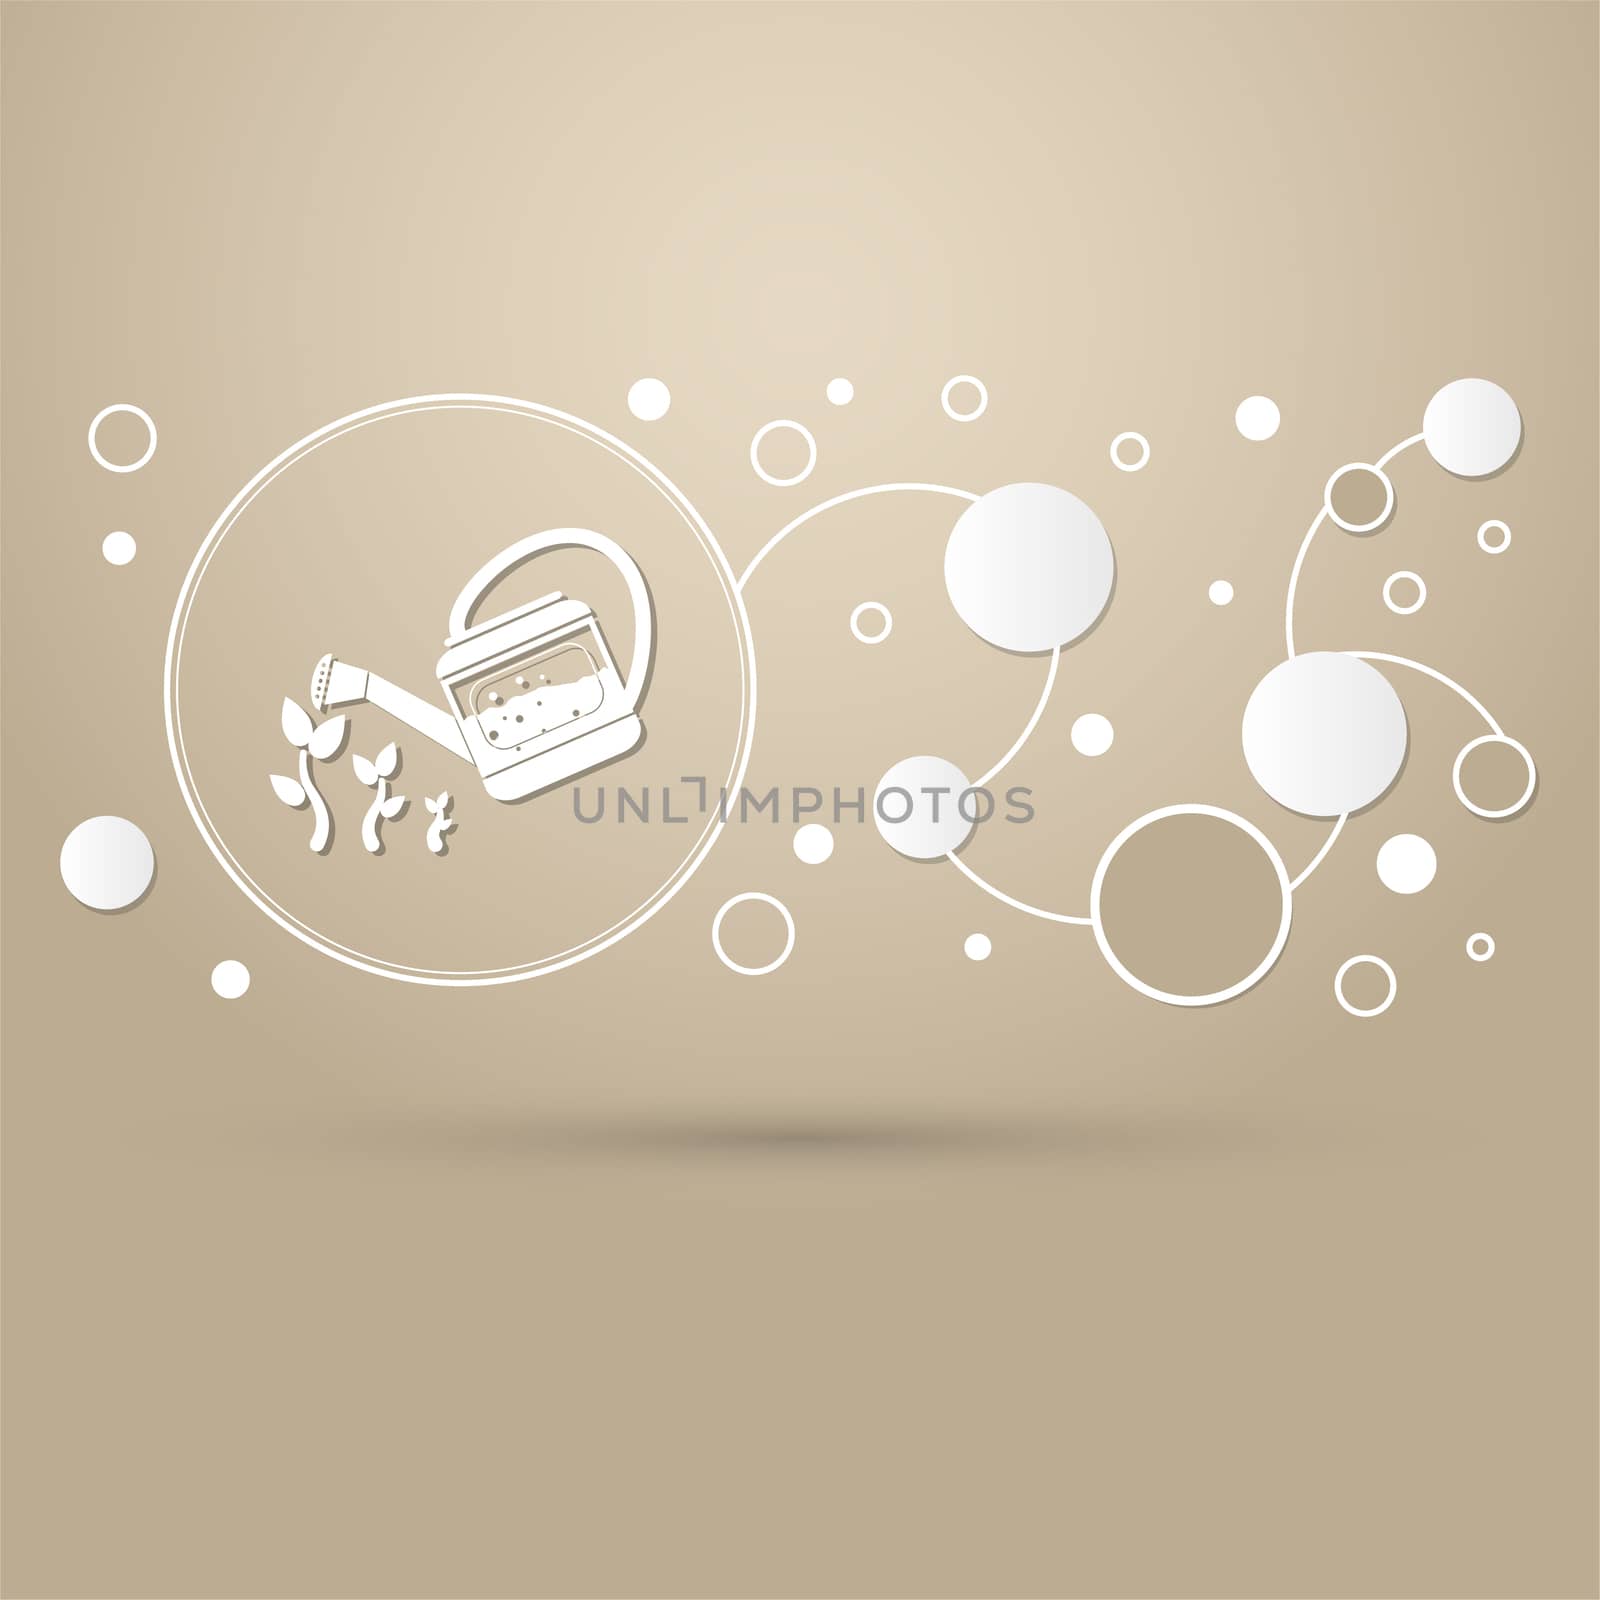 Watering can on a brown background with elegant style and modern design infographic. illustration